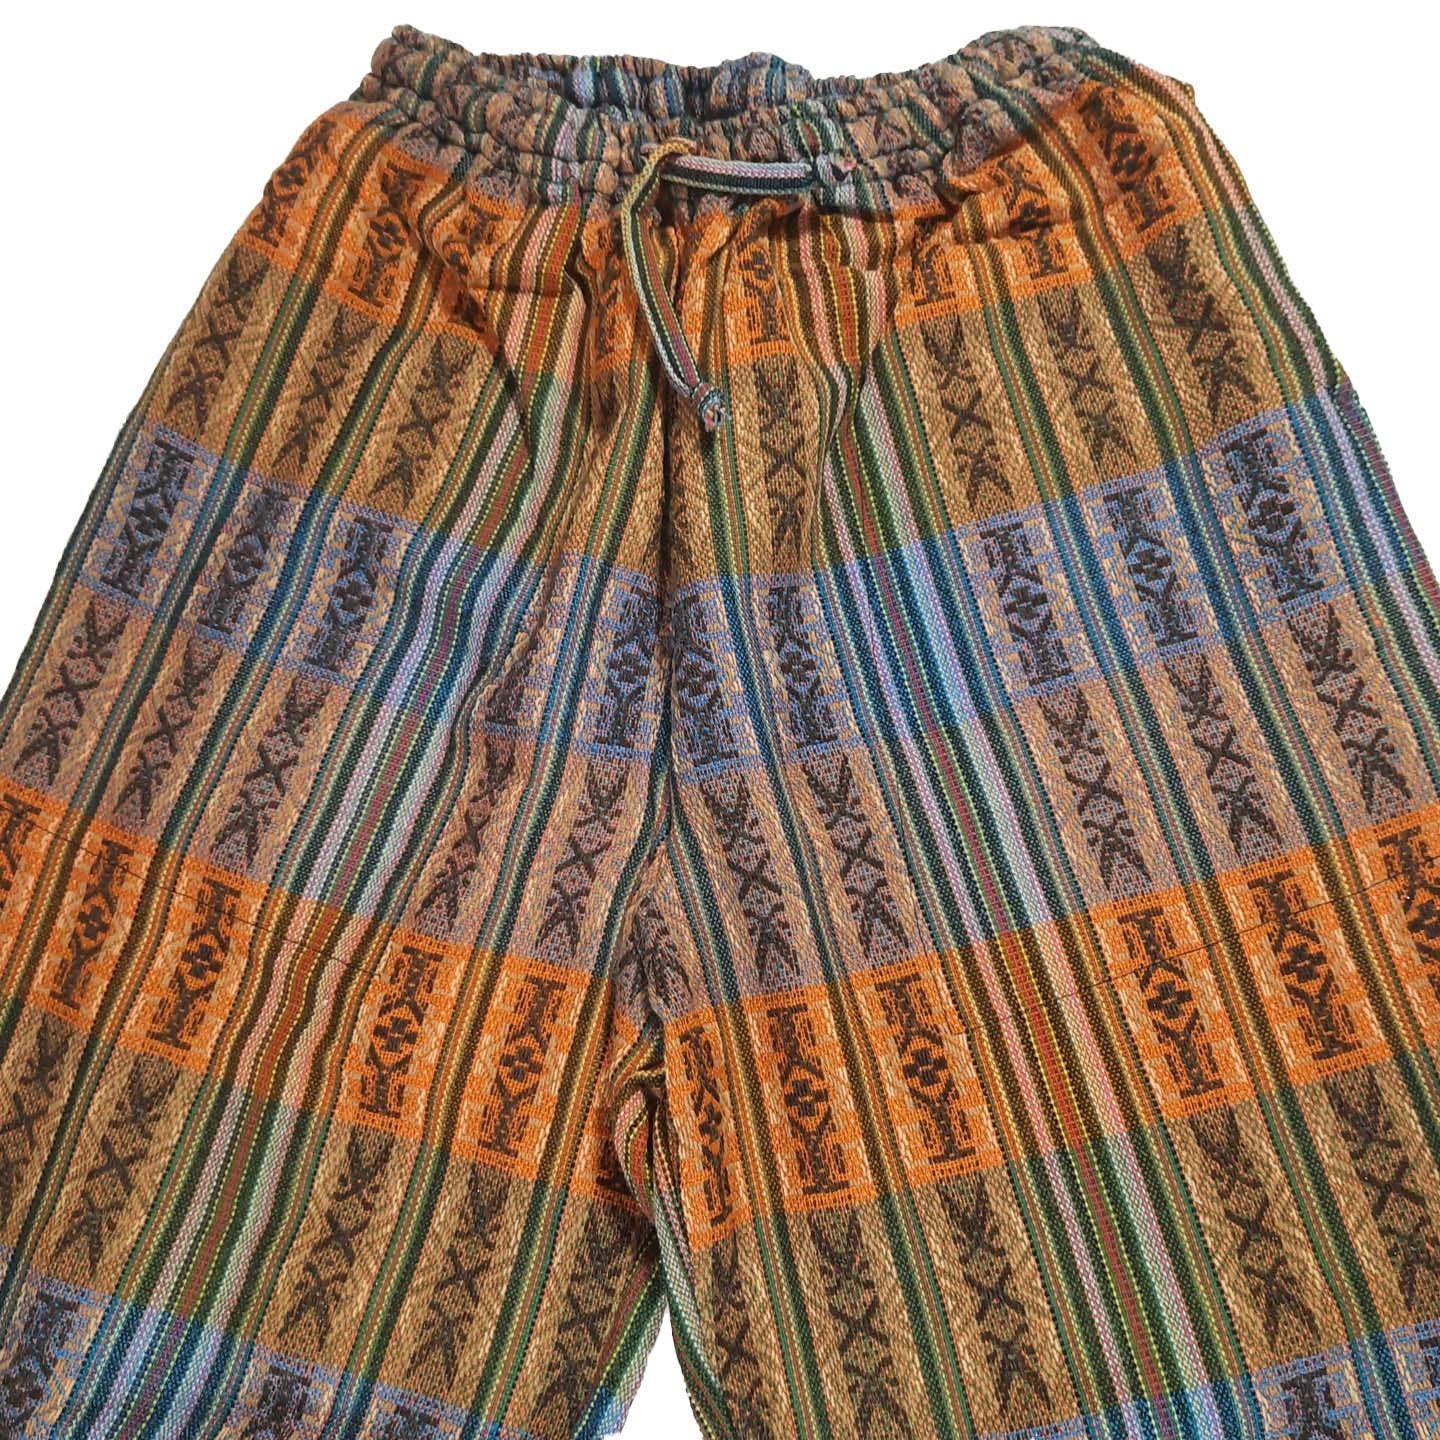 Unisex Hippie Pants with Hidden Pockets Size M | Loungewear Comfy Clothes | Earthy Orange | Father's Day Gift